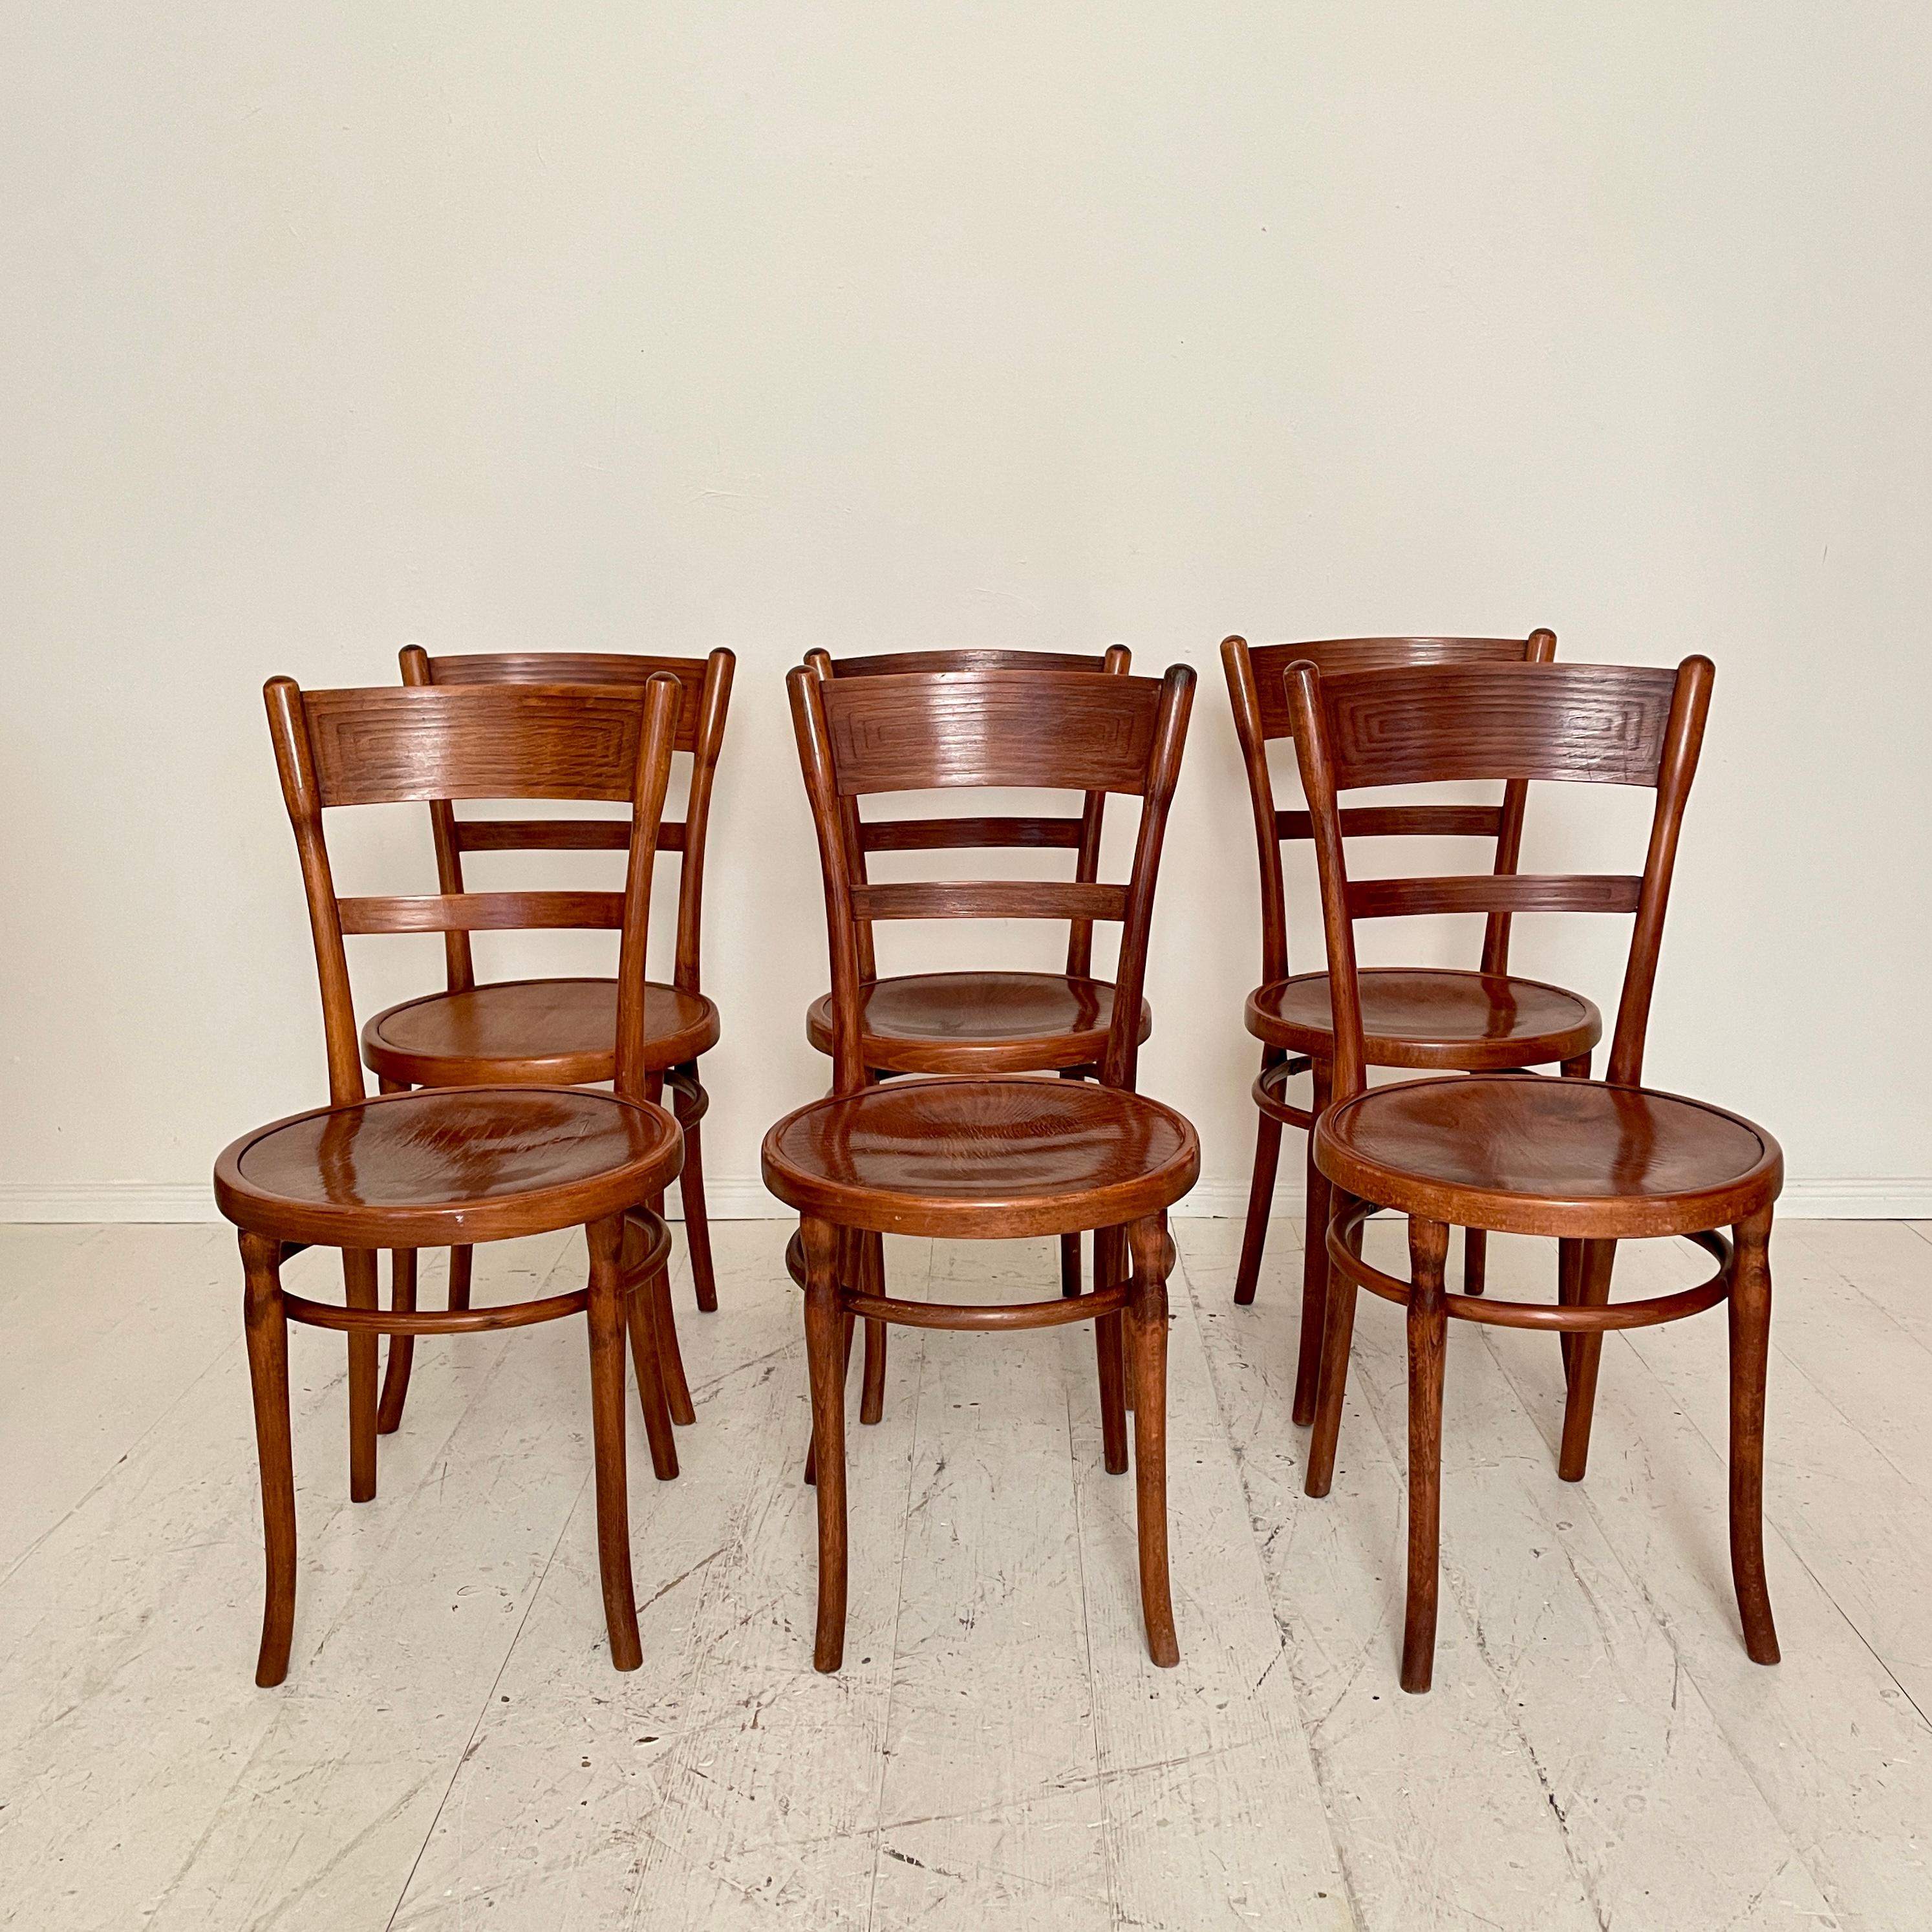 This fantastic set of six Jugendstil bentwood dining chairs have been made in the 1930s in Berlin.
They are in beautiful original condition and have got a great Patina.
Apart from one which has got the seat plate replaced. But it is good aged and